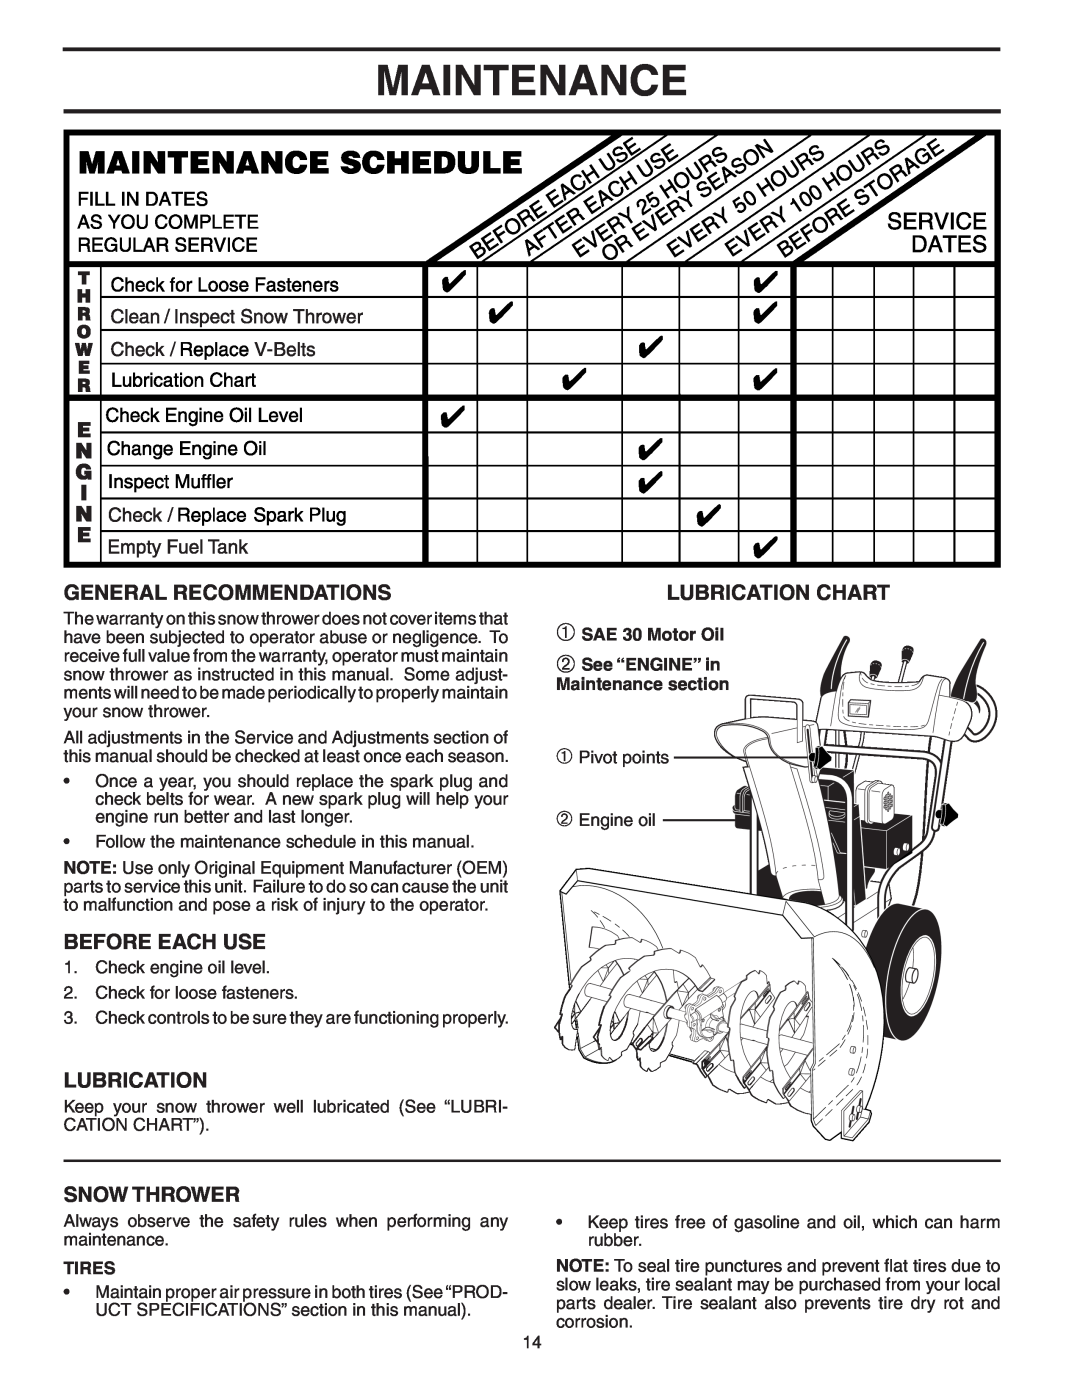 Poulan PP8527ESA Maintenance, General Recommendations, Before Each Use, Snow Thrower, Lubrication Chart, Tires 